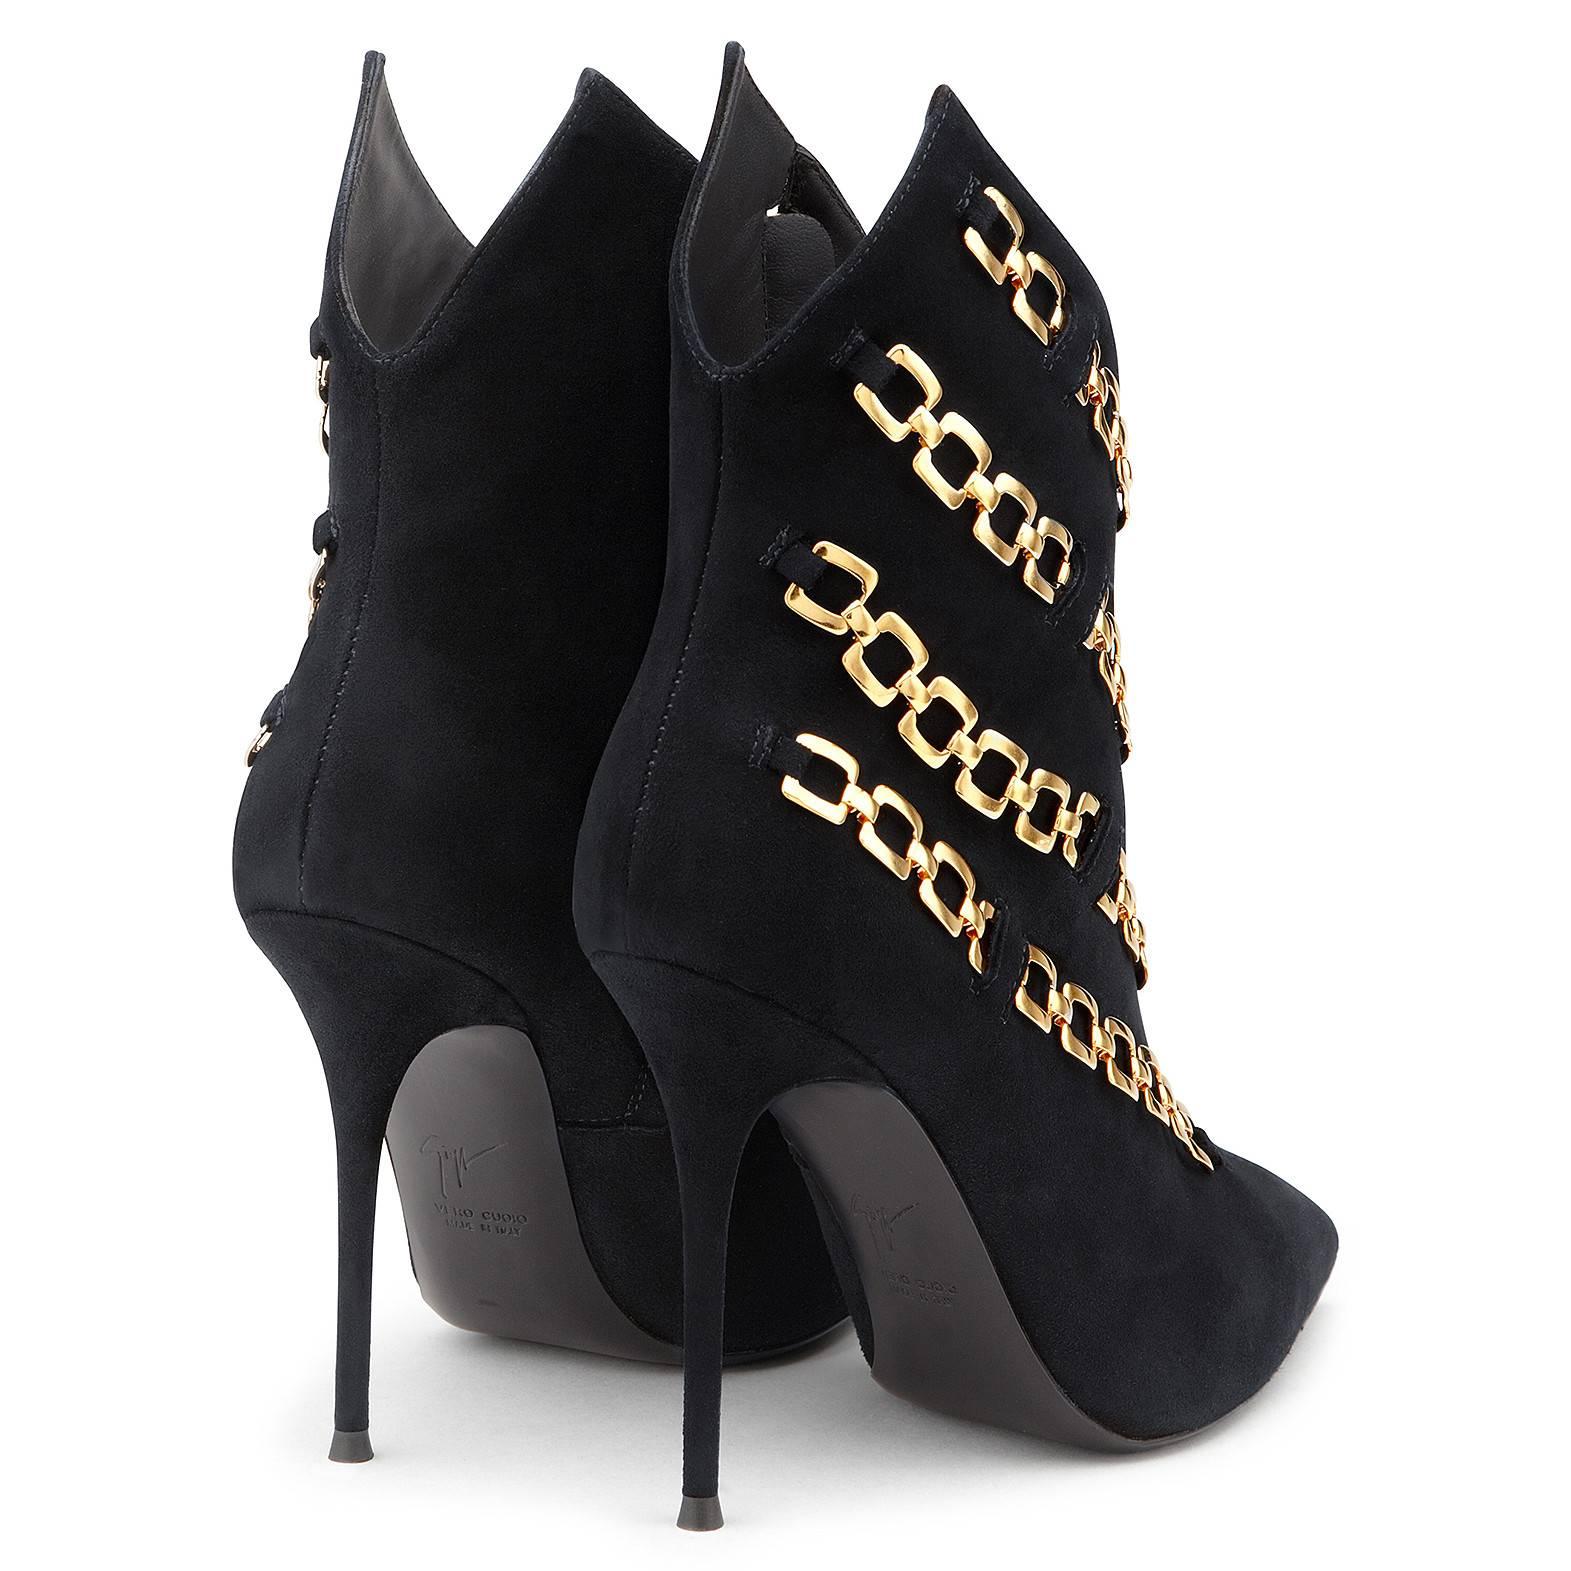 Giuseppe Zanotti New Black Suede Gold Link Ankle Booties W/Box 2